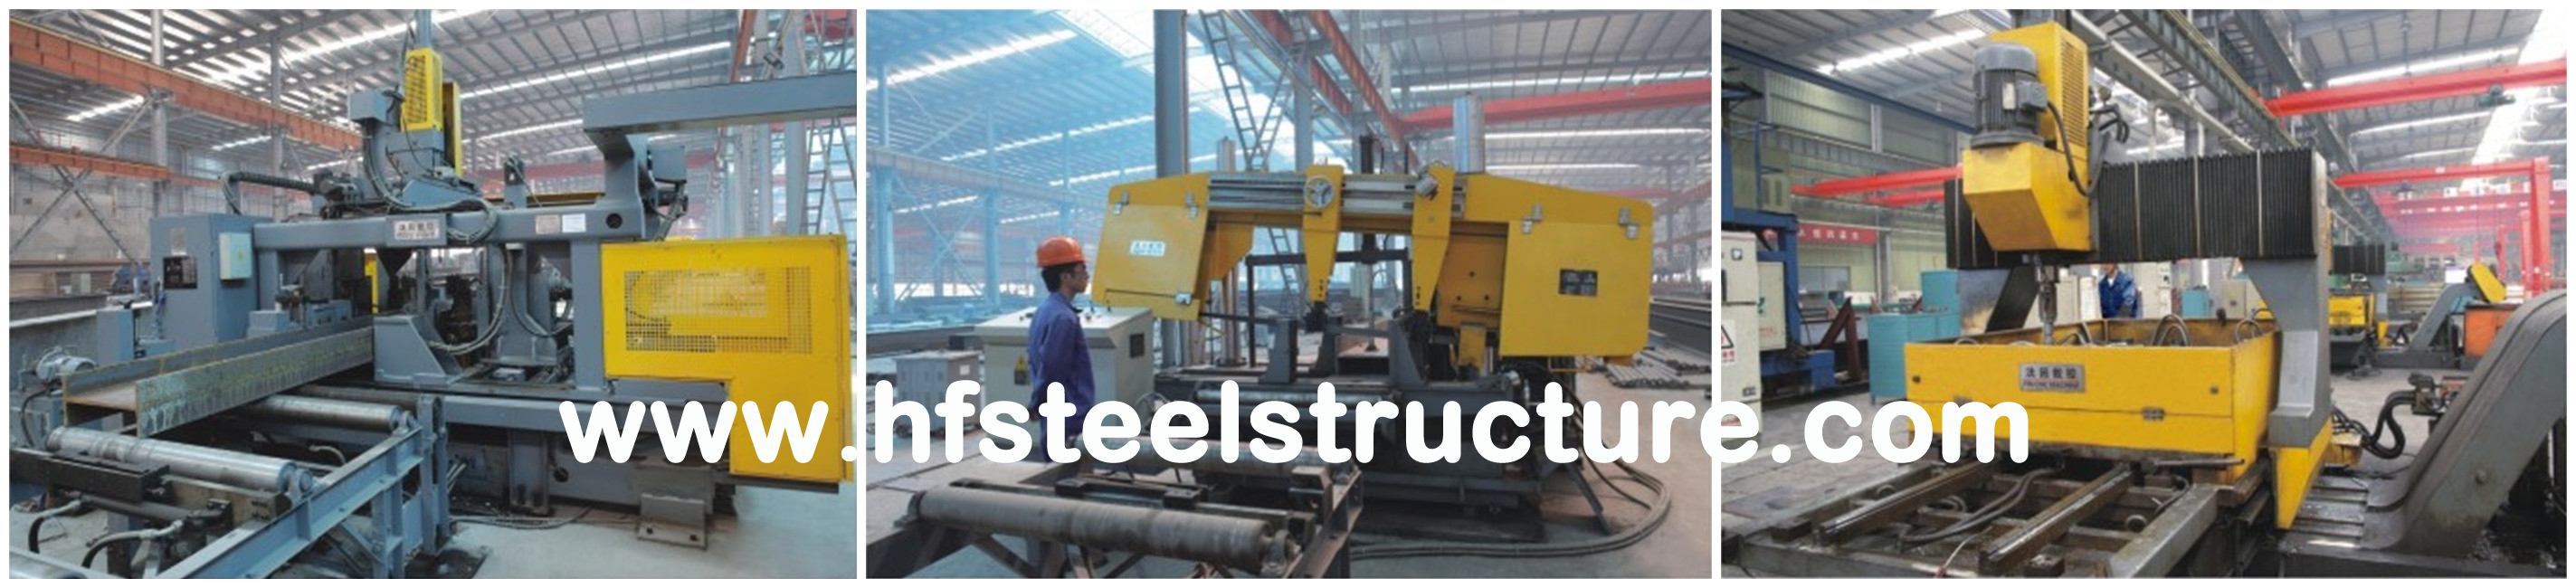 Multi-storey Structural Steel Fabricators High Strength For Frame Building